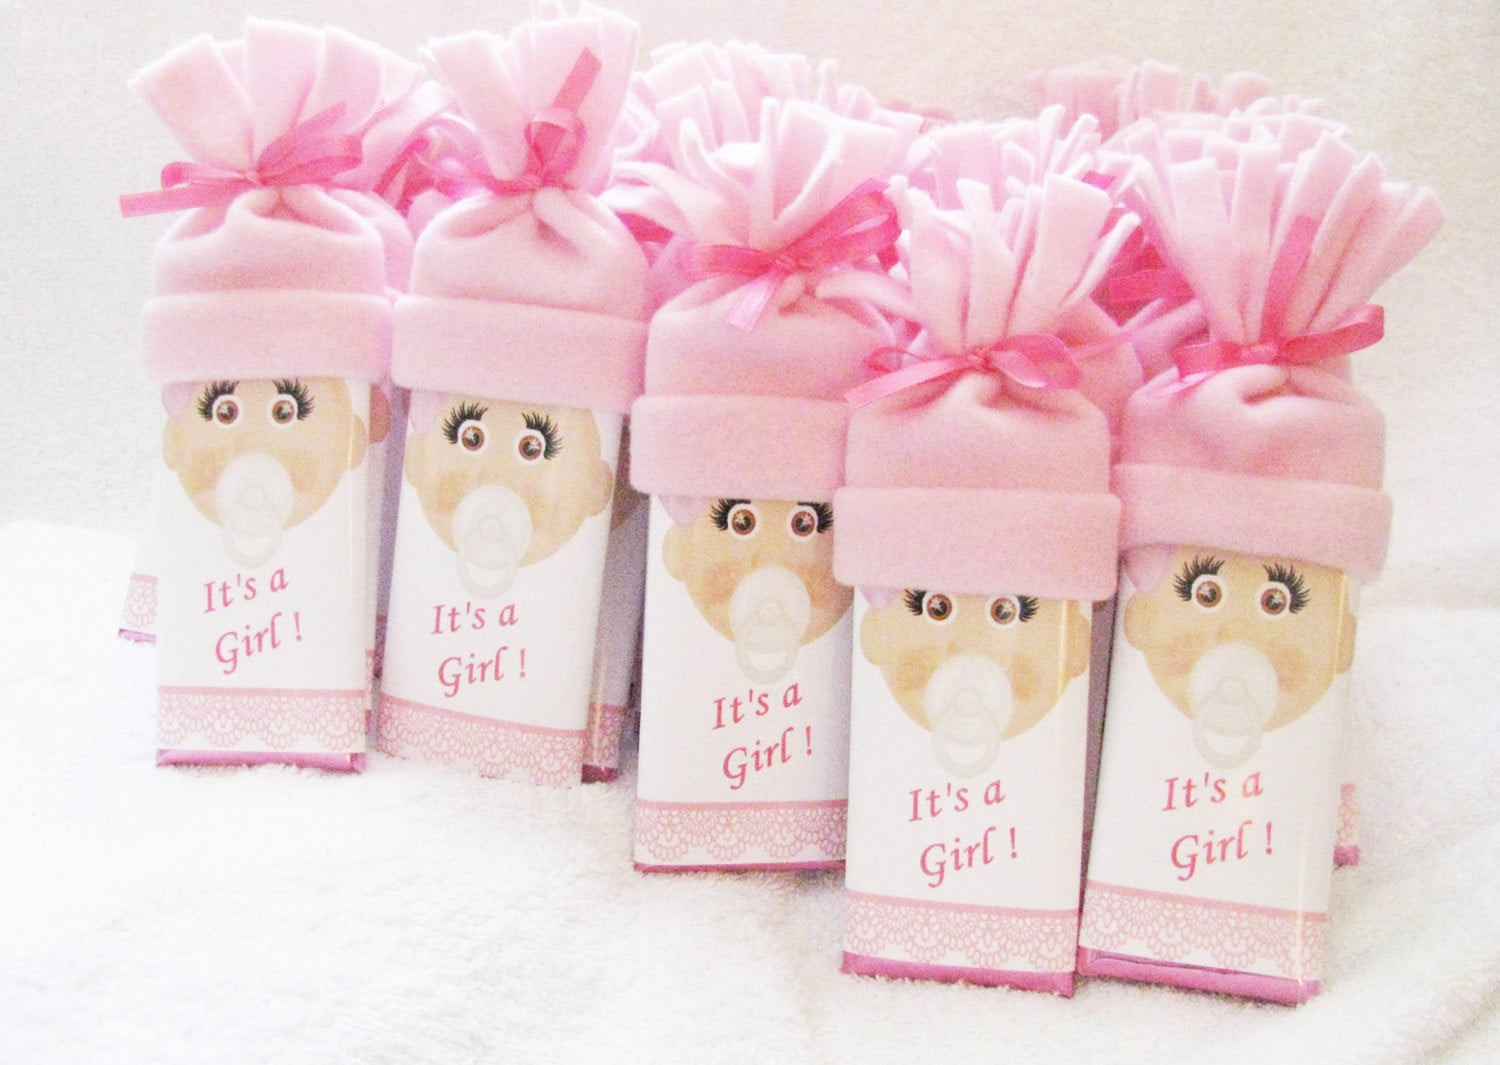 DIY Hershey Bar Baby Shower Favors
 Baby Shower Favors special Hershey bars with handmade